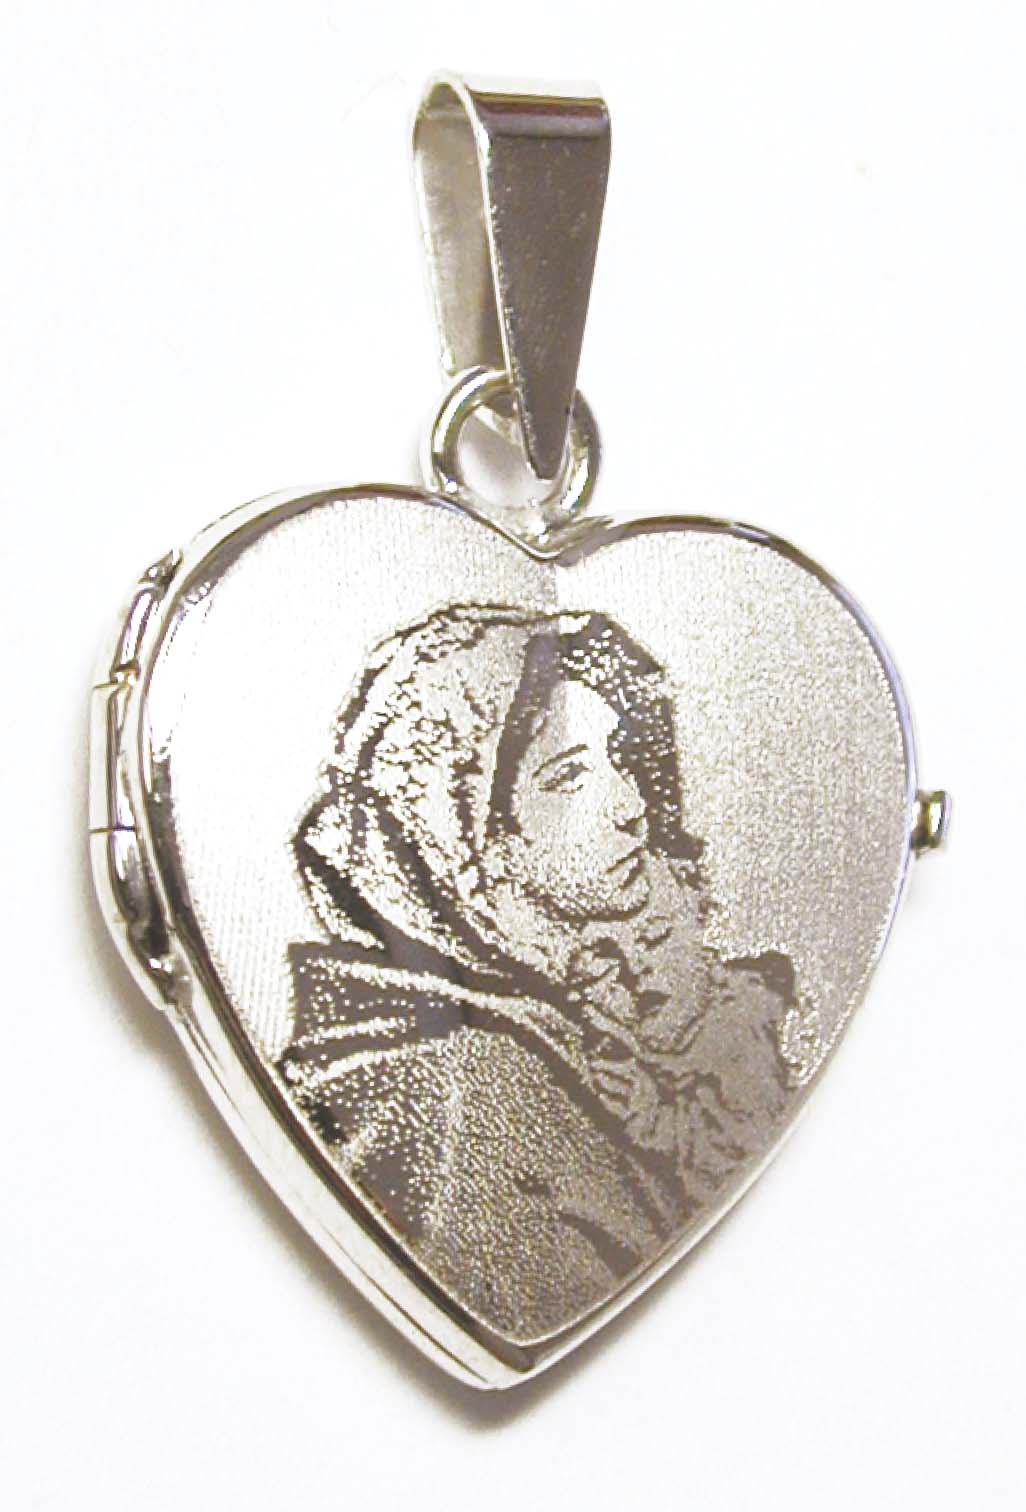 
Laser Etched Virgin Mary and Baby Jesus Heart Locket
